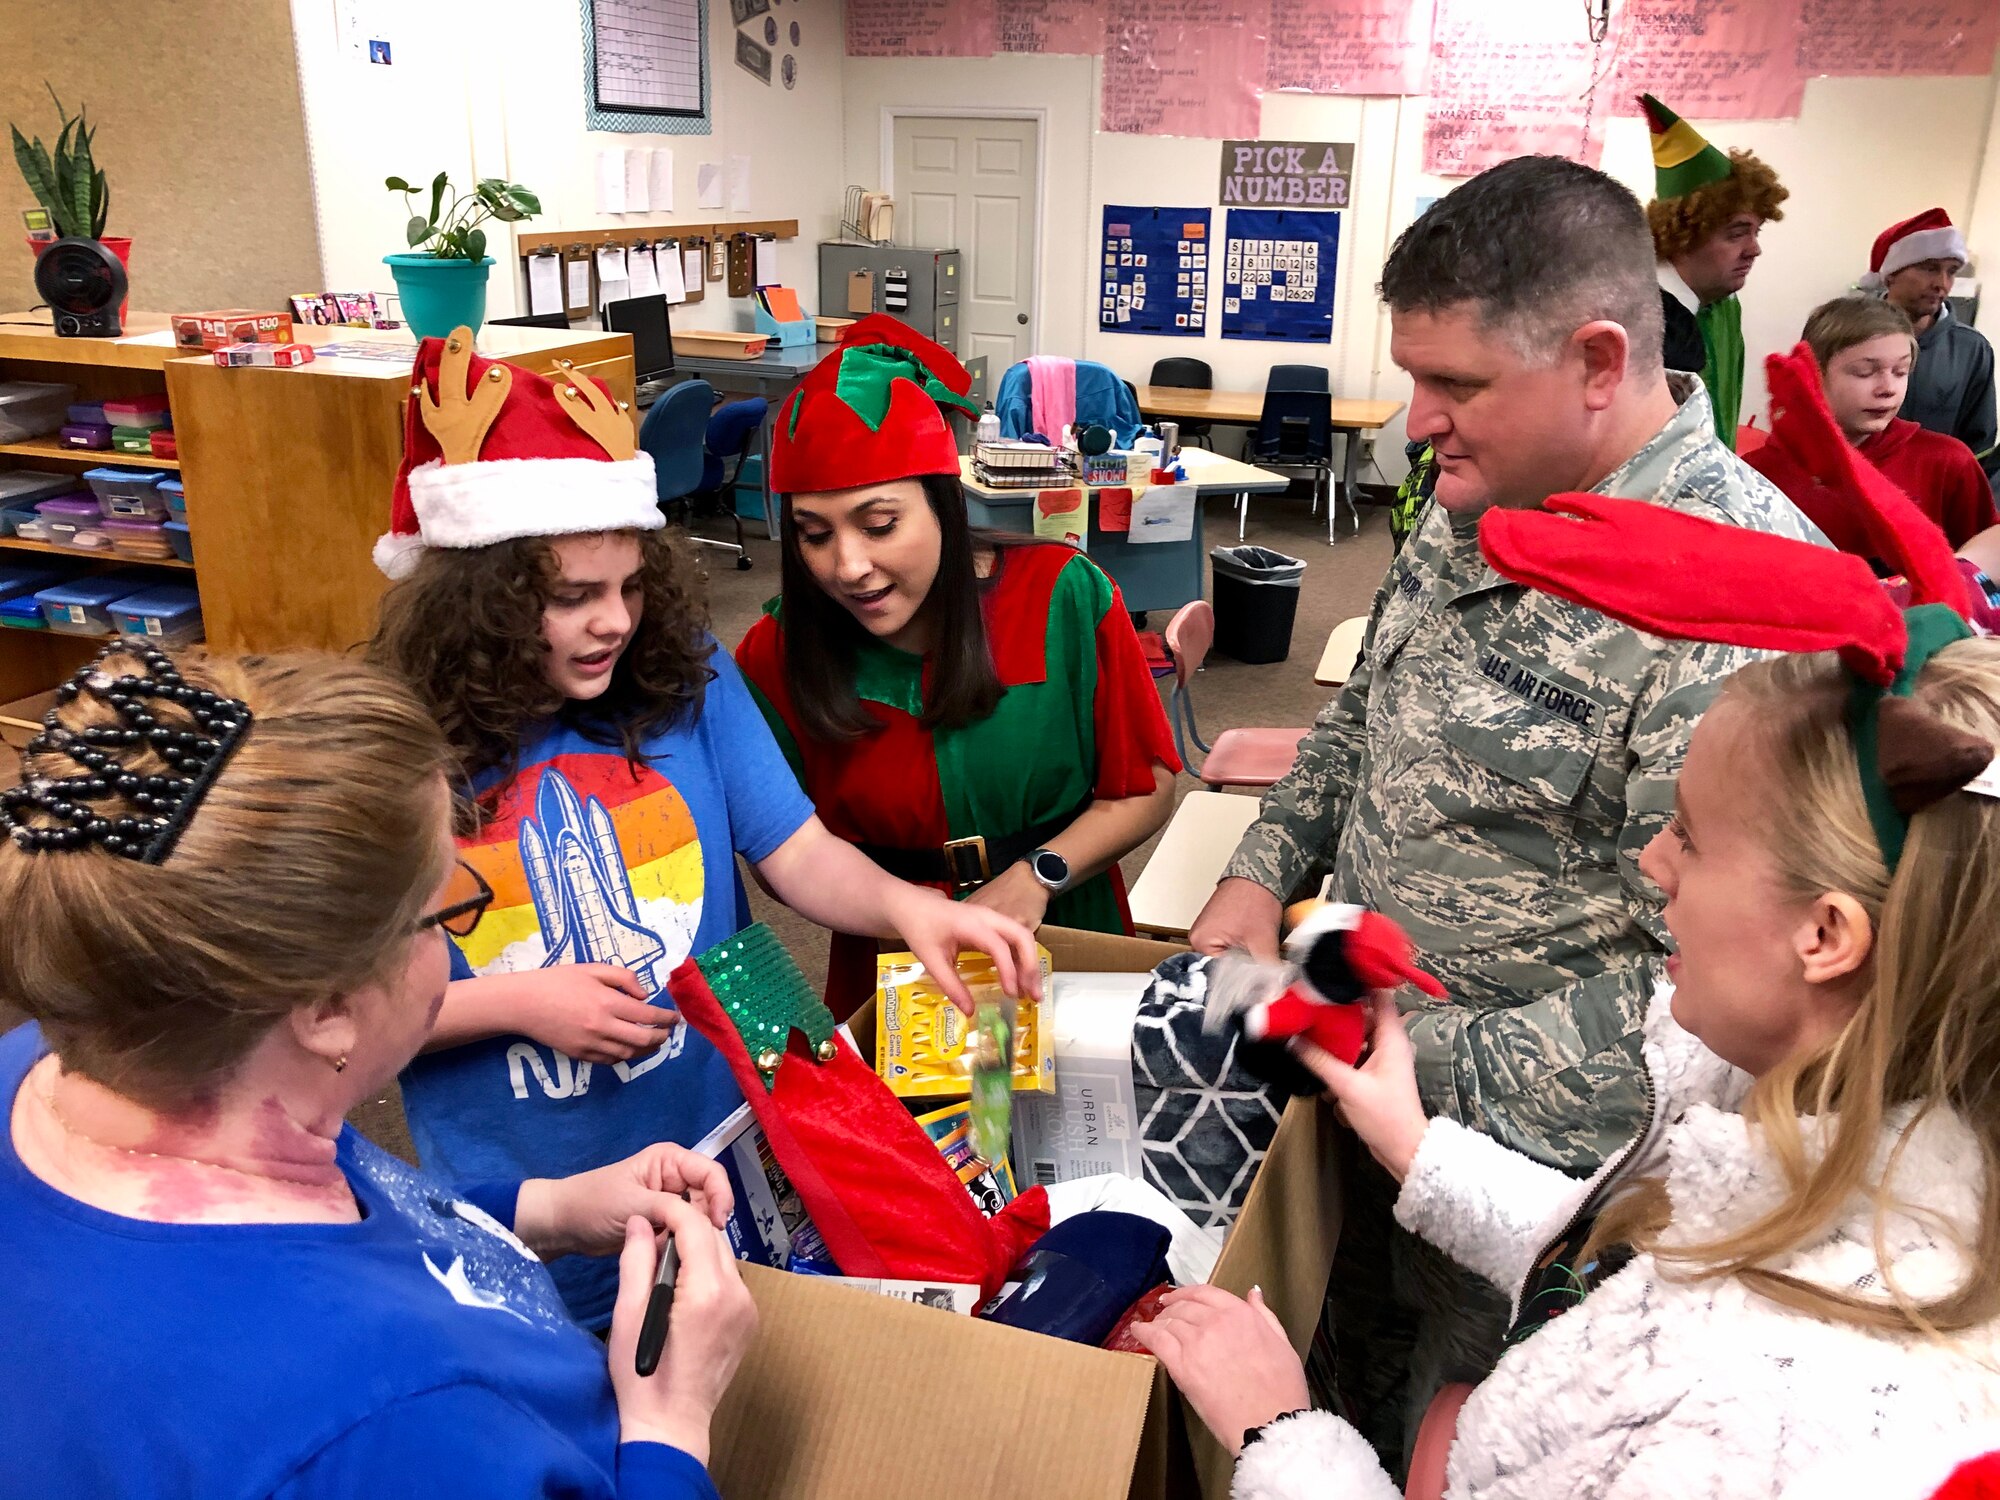 Air Force reservists from the wing’s 67th Aerial Port Squadron help Shawn unwrap gifts during a Christmas party for students with special needs at Ogden’s Mound Fort Junior High